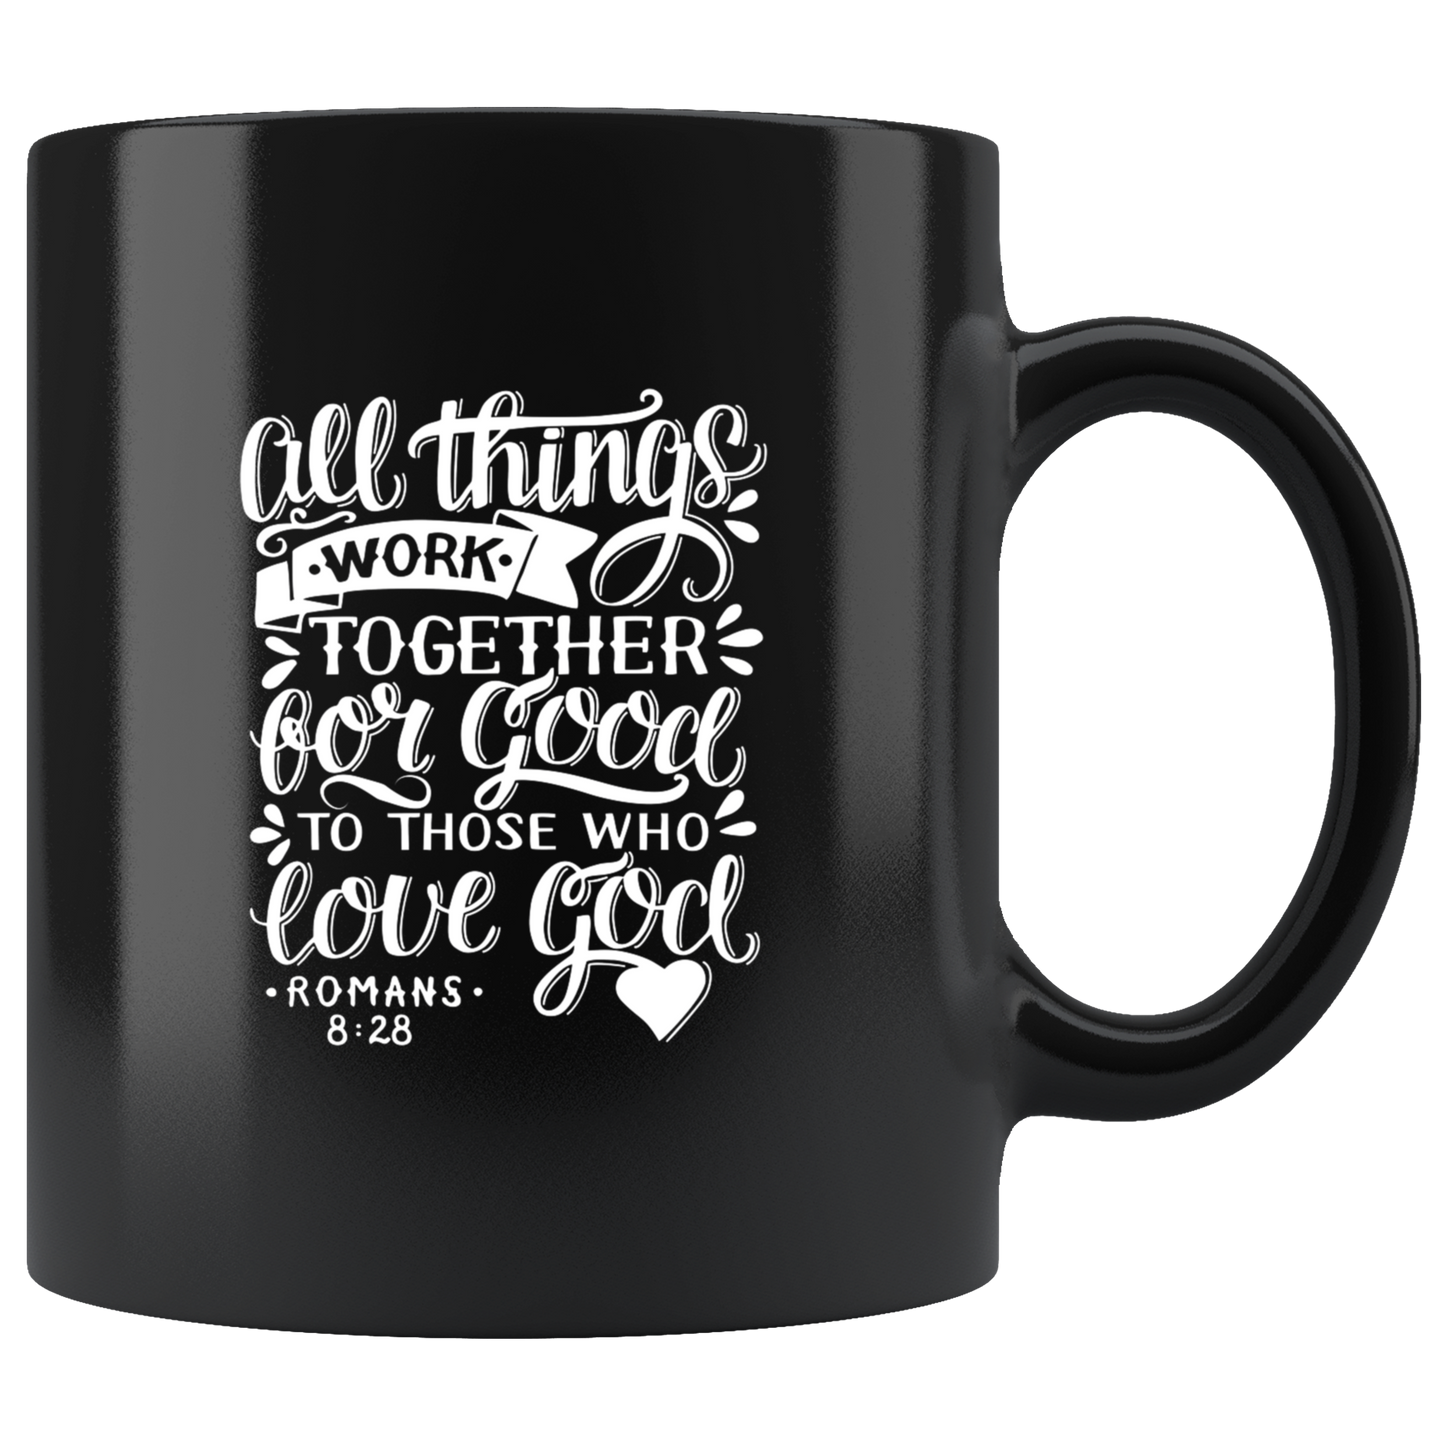 All Things Work Together For Good To Those Who Love God, Romans 8:28 - Black 11oz Mug